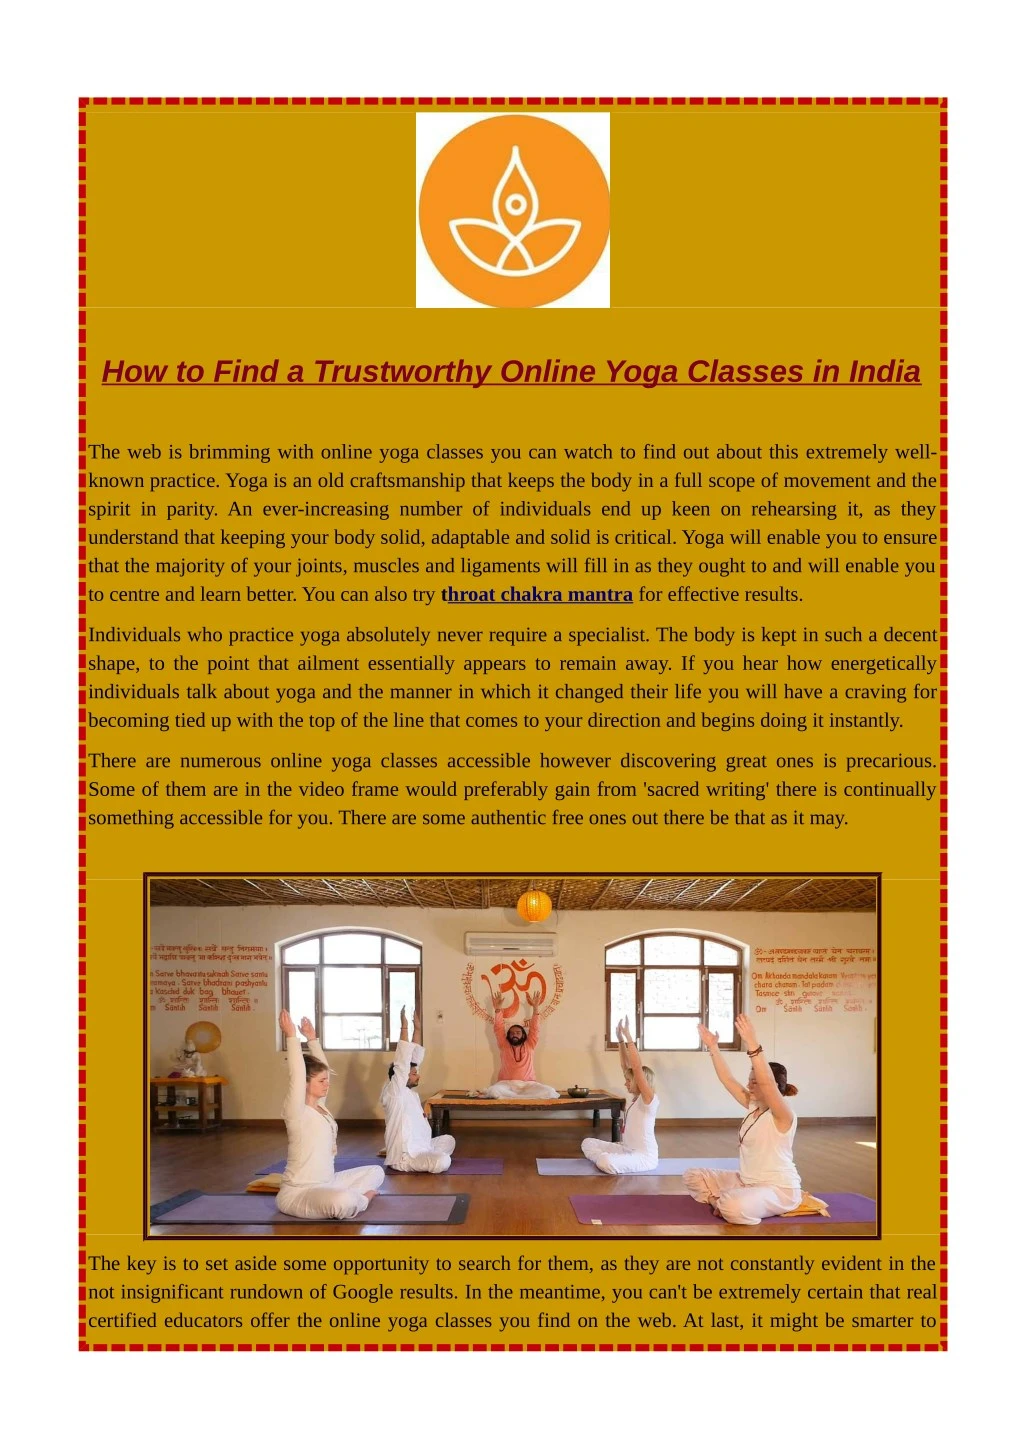 how to find a trustworthy online yoga classes